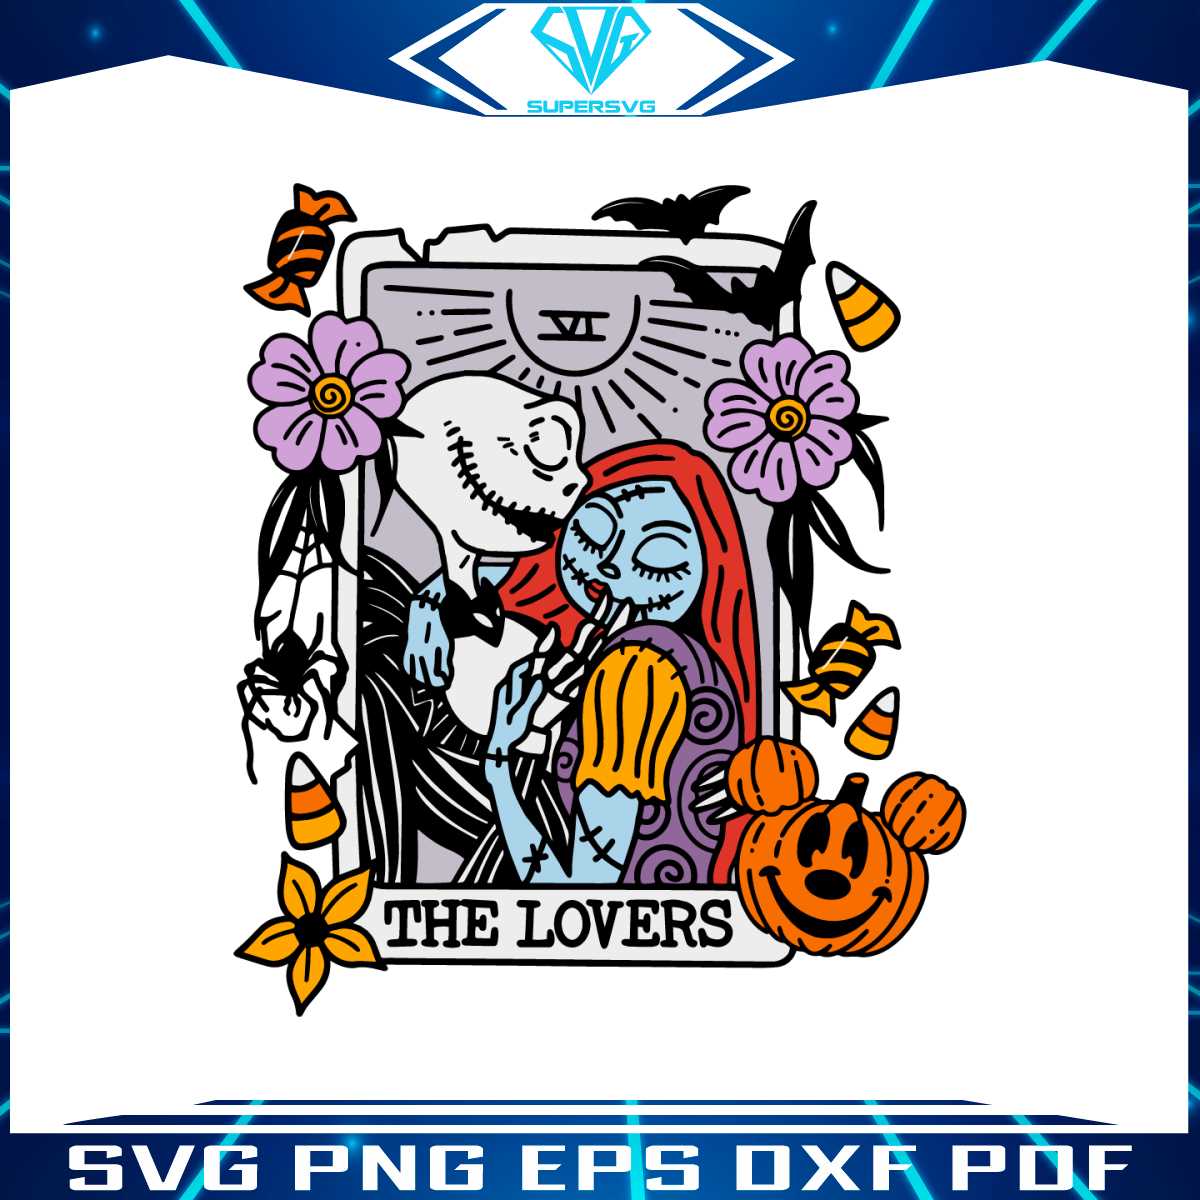 halloween-jack-and-sally-tarot-lovers-svg-graphic-design-file